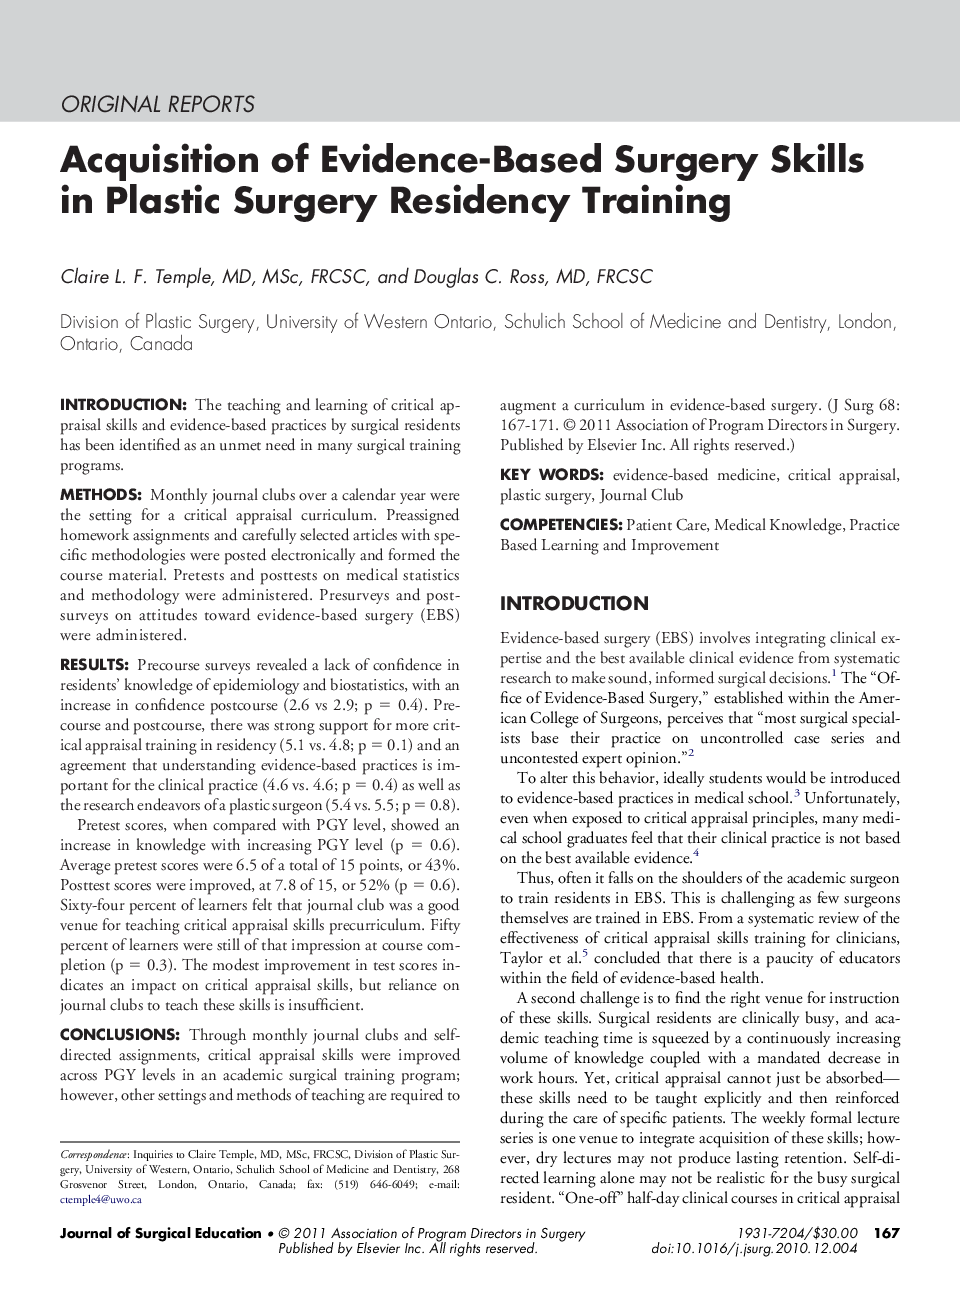 Acquisition of Evidence-Based Surgery Skills in Plastic Surgery Residency Training